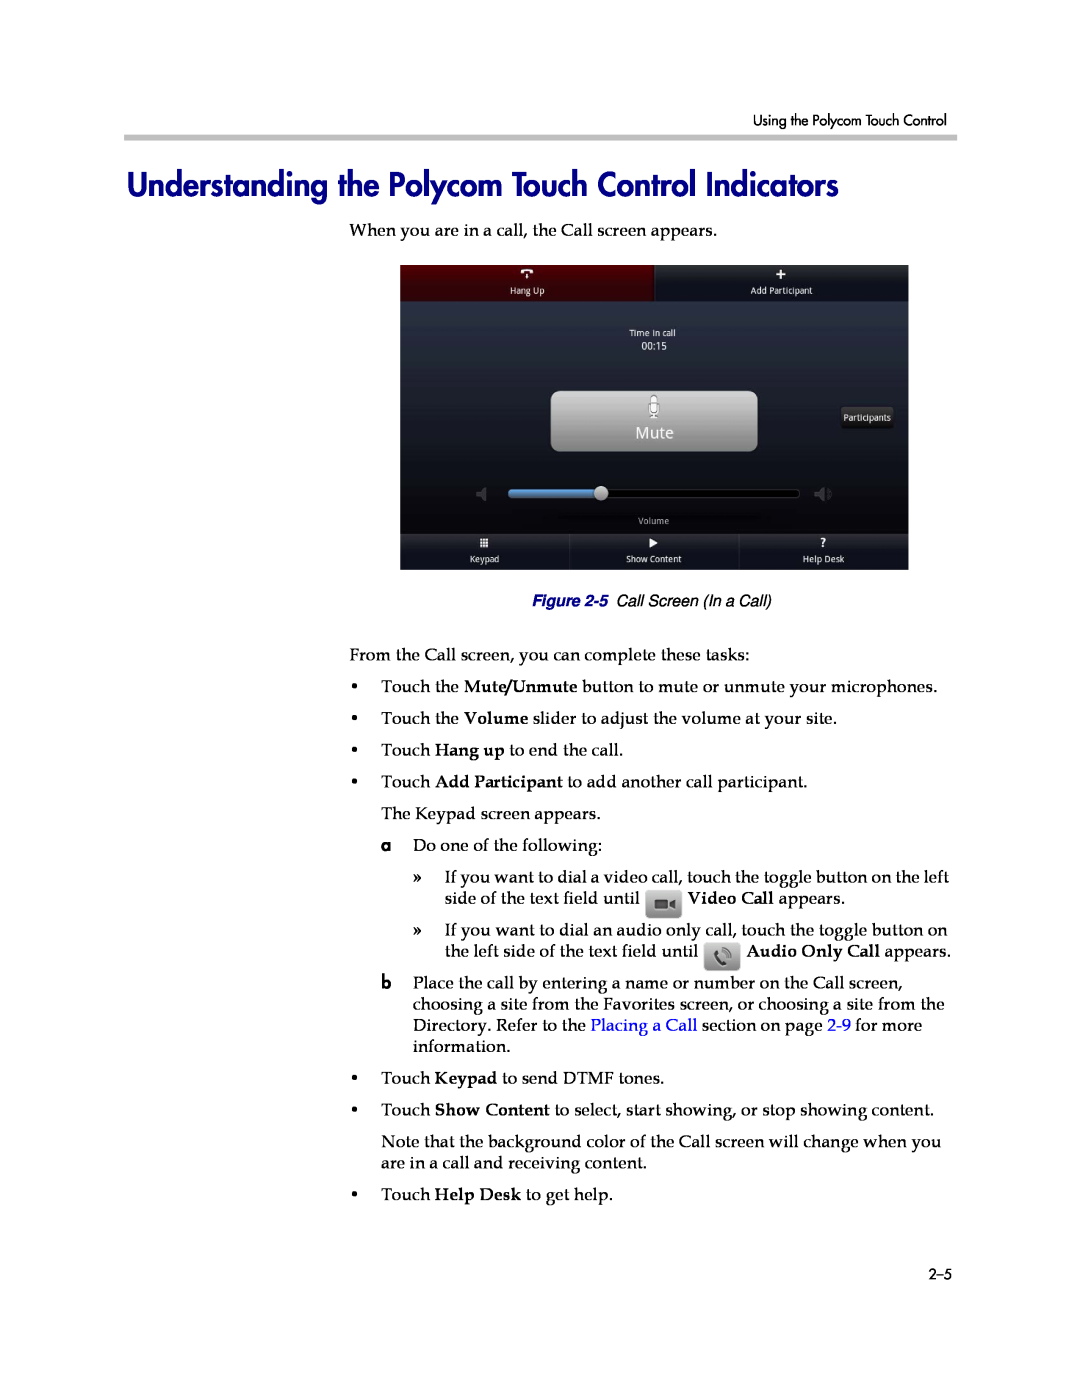 Polycom 3725-63211-002, A manual Understanding the Polycom Touch Control Indicators 